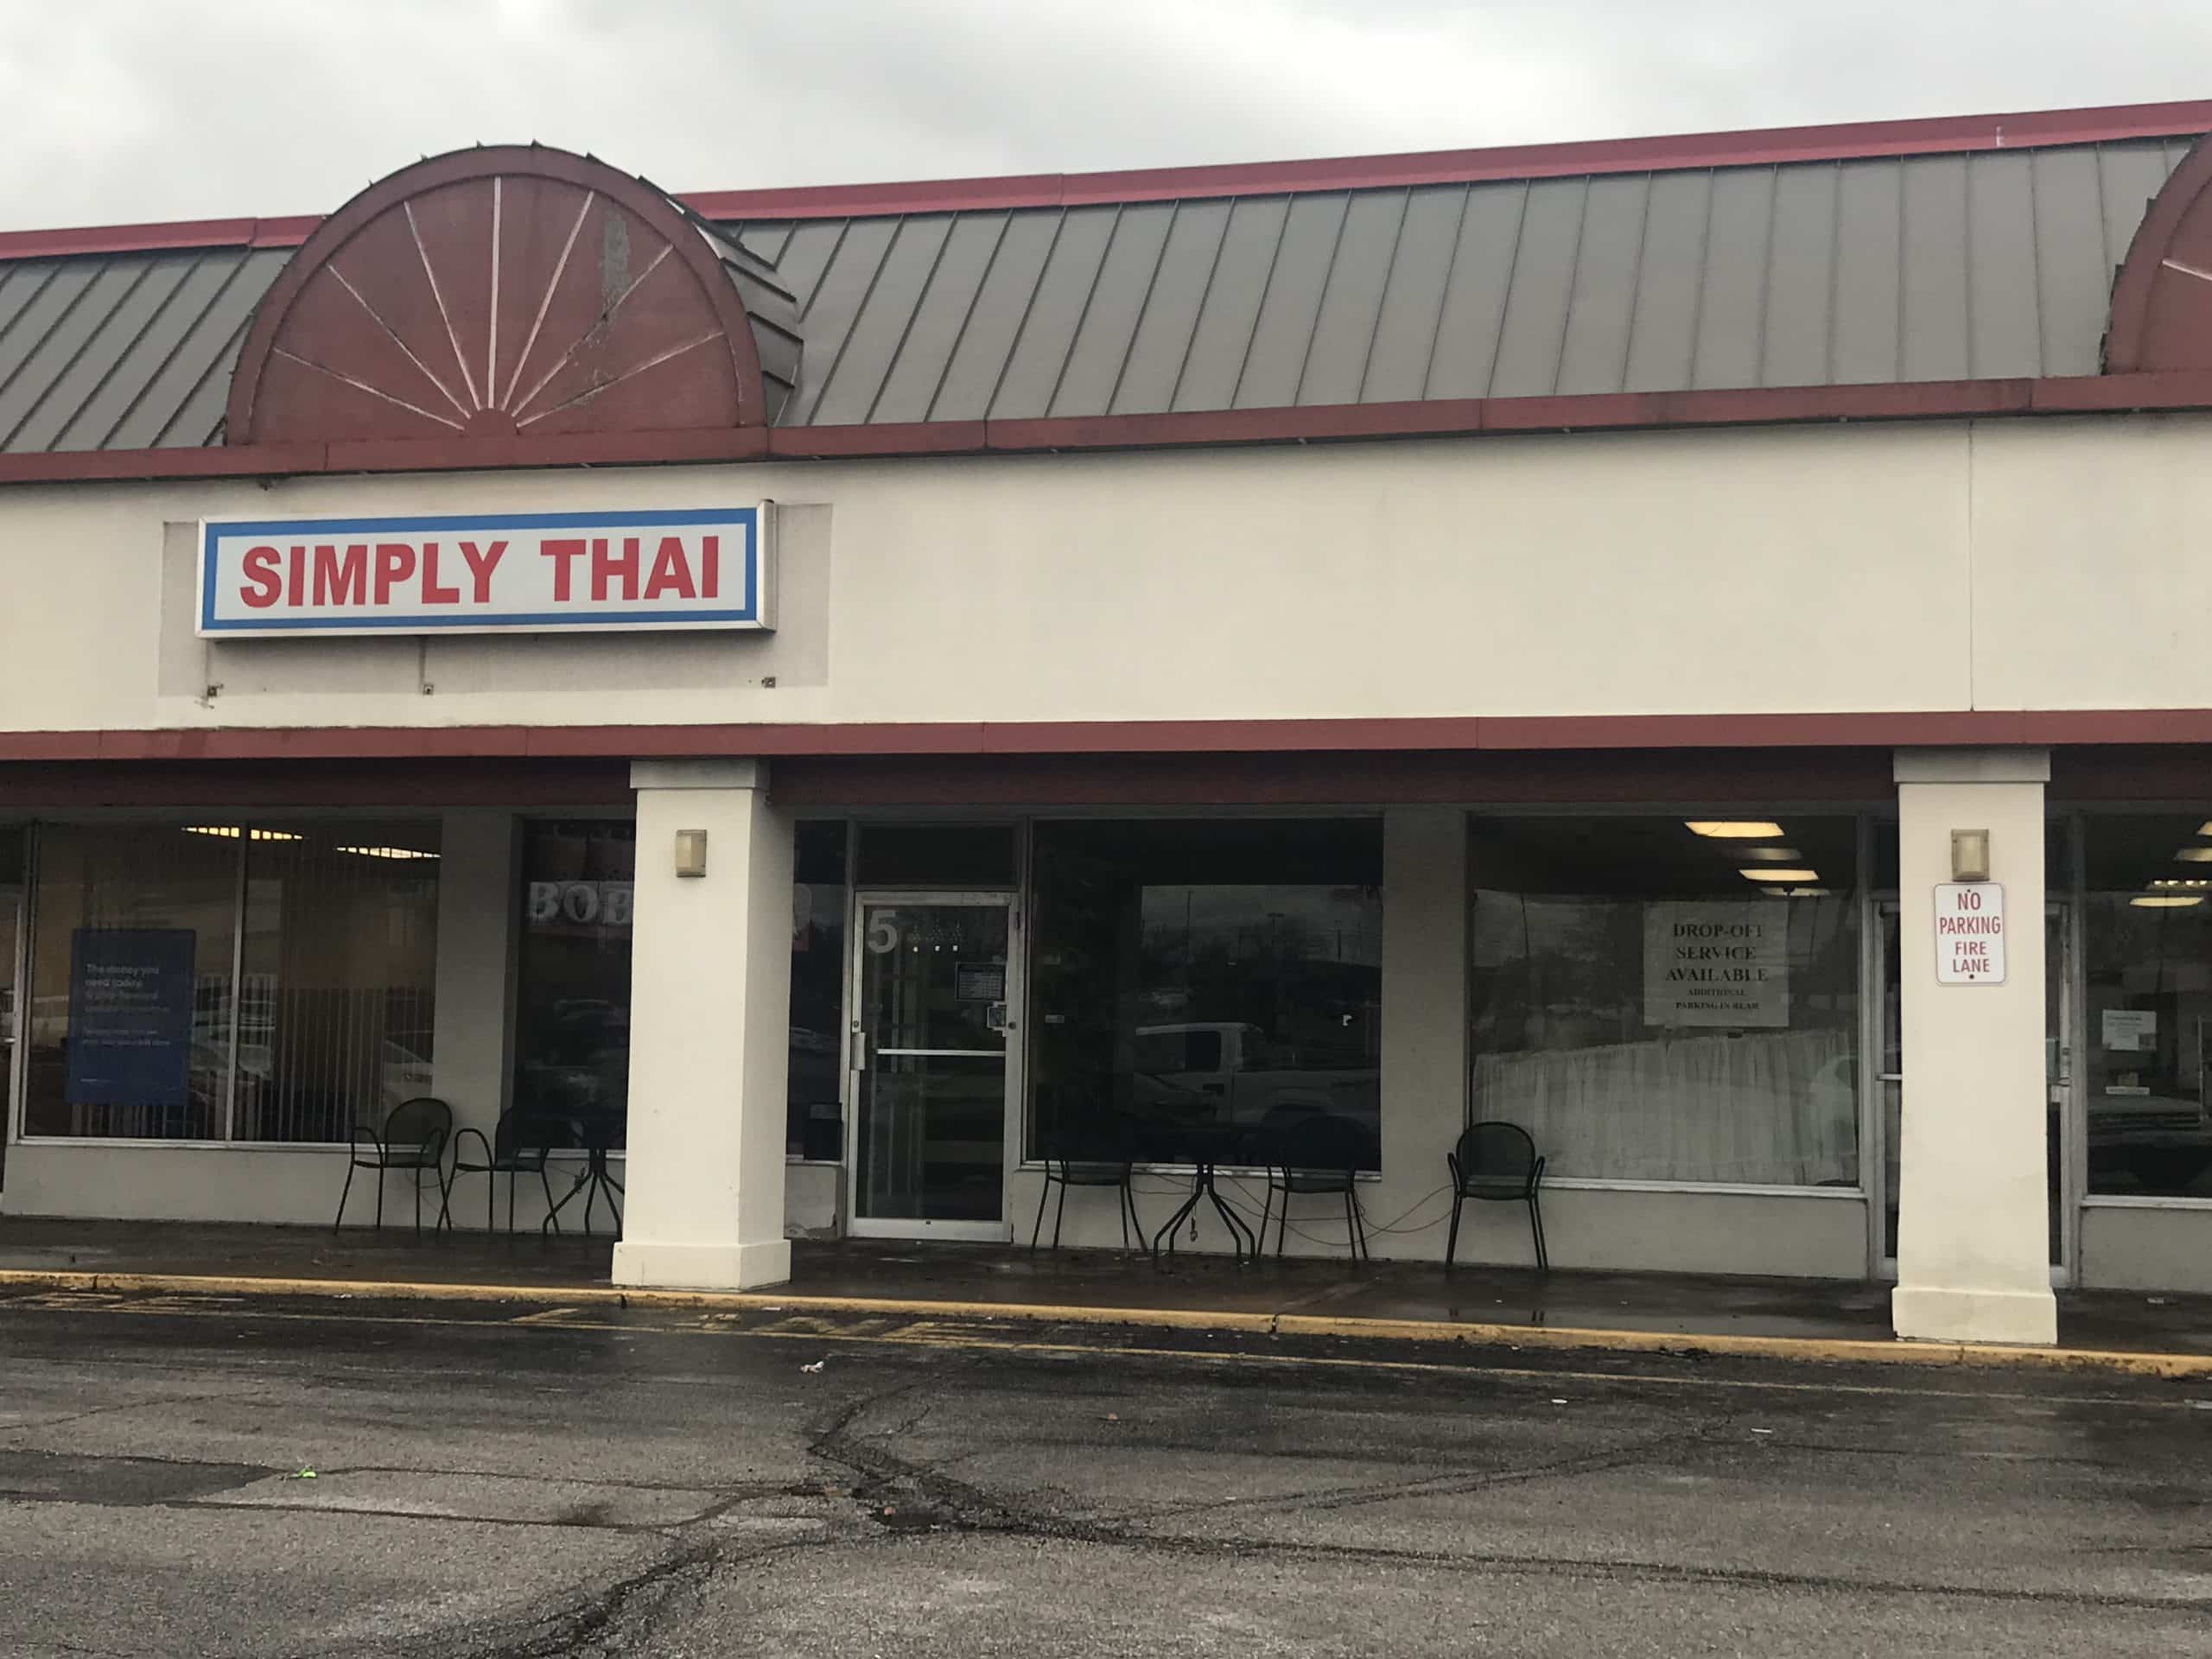 Restaurant Review Published for Simply Thai